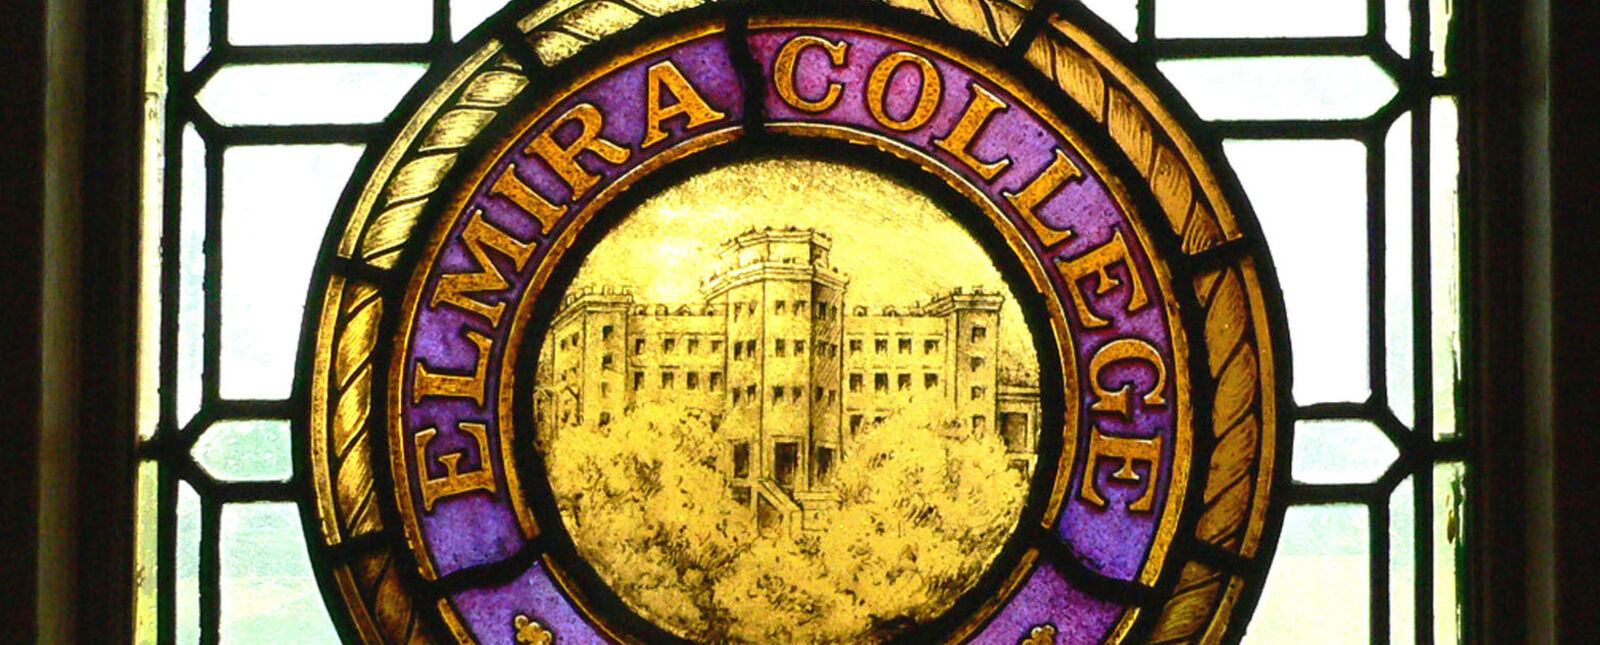 A stained glass window depicts the Elmira College seal